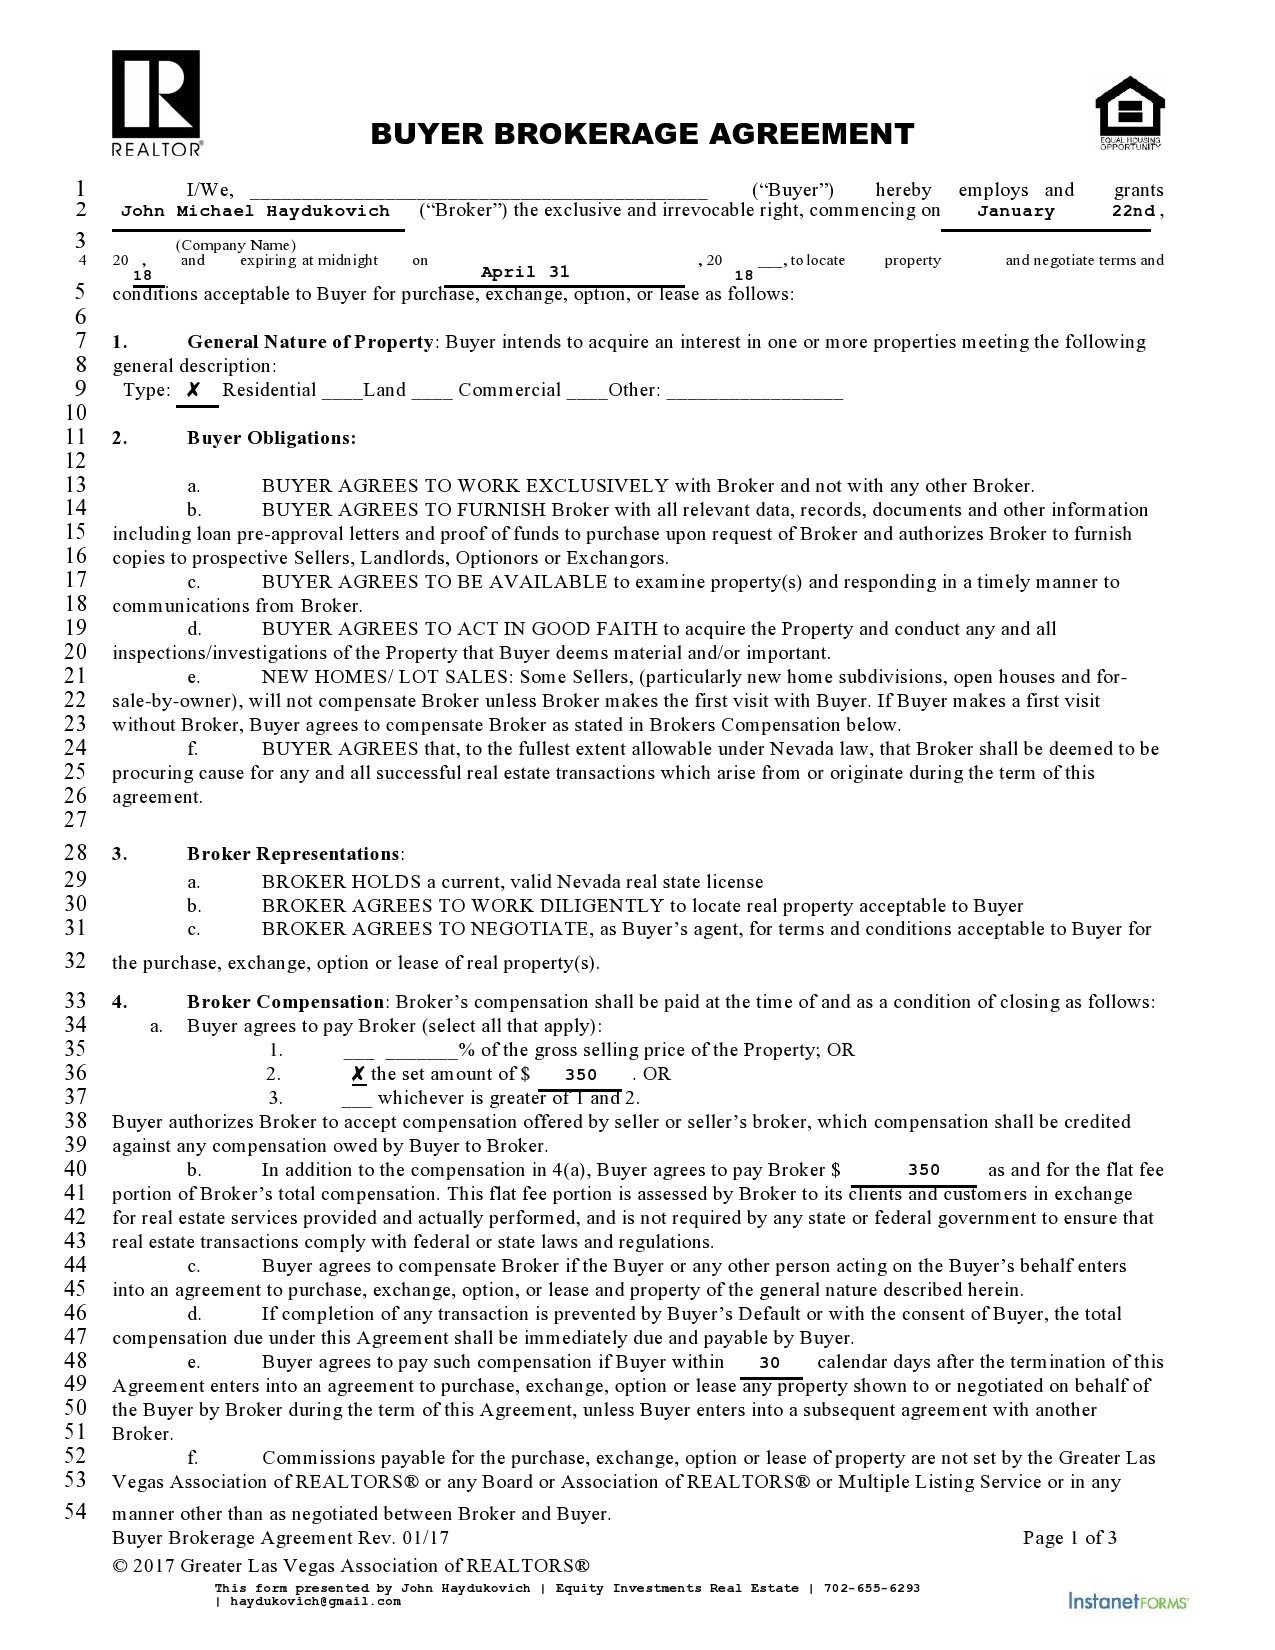 Free buyer agency agreement 37